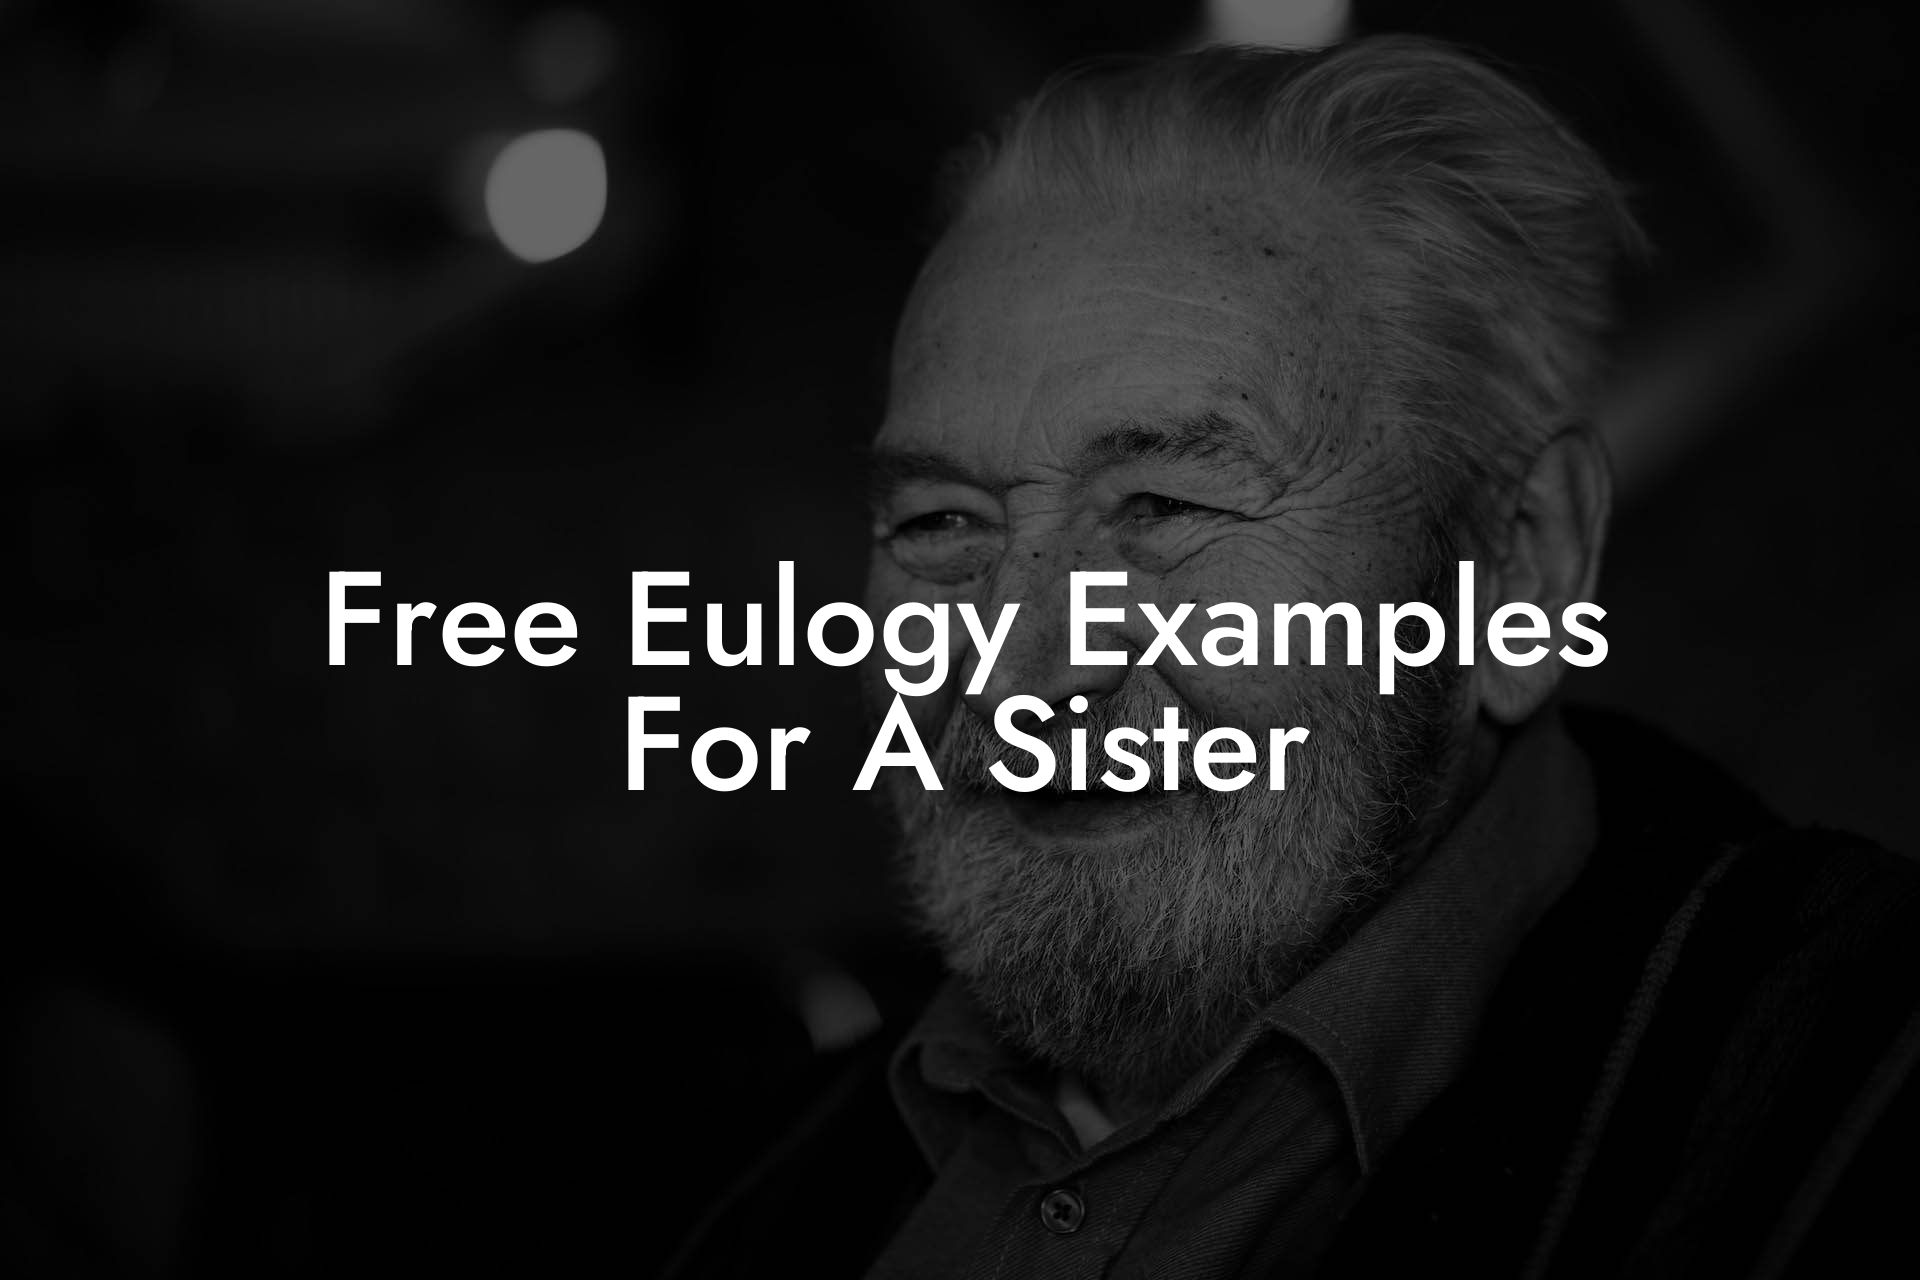 Free Eulogy Examples For A Sister